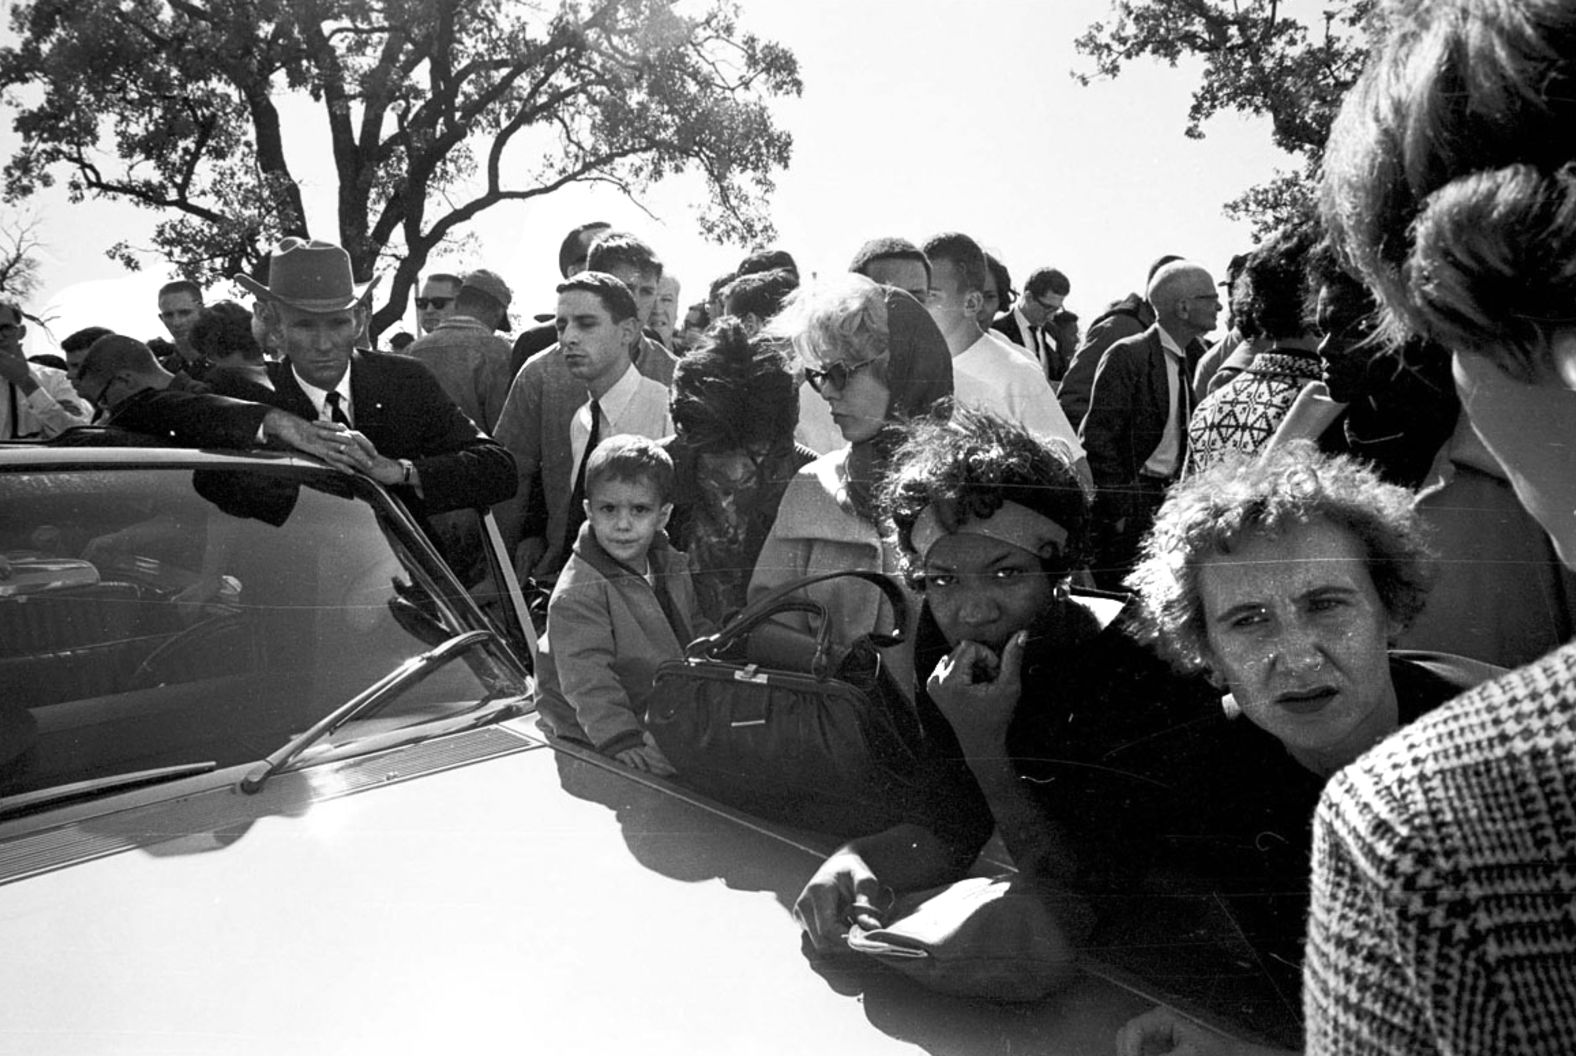 Hurchel Jacks, who drove Vice President Lyndon B. Johnson's car in the motorcade, listens to the news on the car radio with others who were outside the Parkland Hospital's emergency entrance.